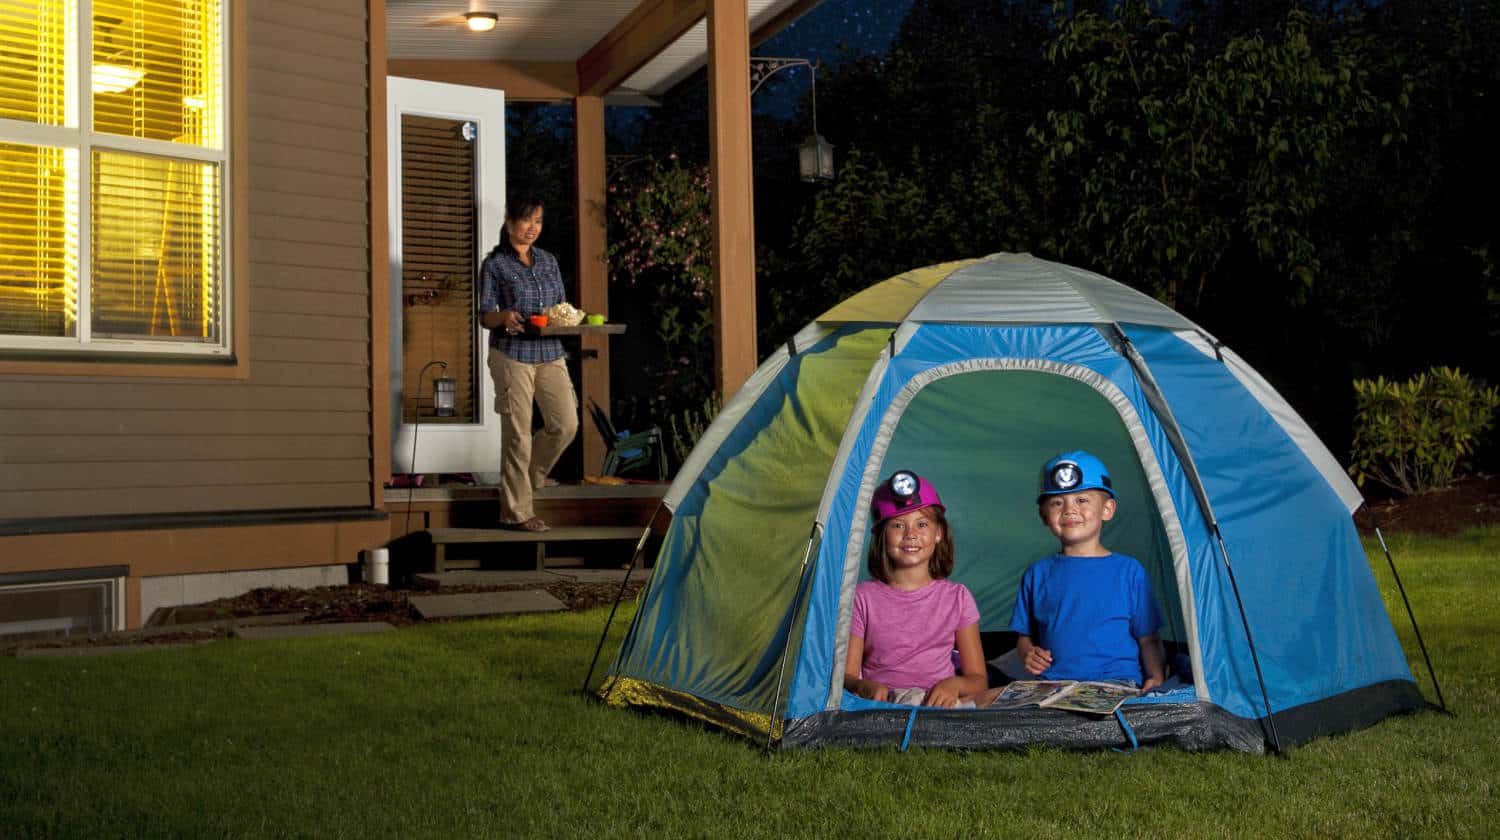 Feature | A backyard campout |Outdoor Tech Gadgets For Your Backyard